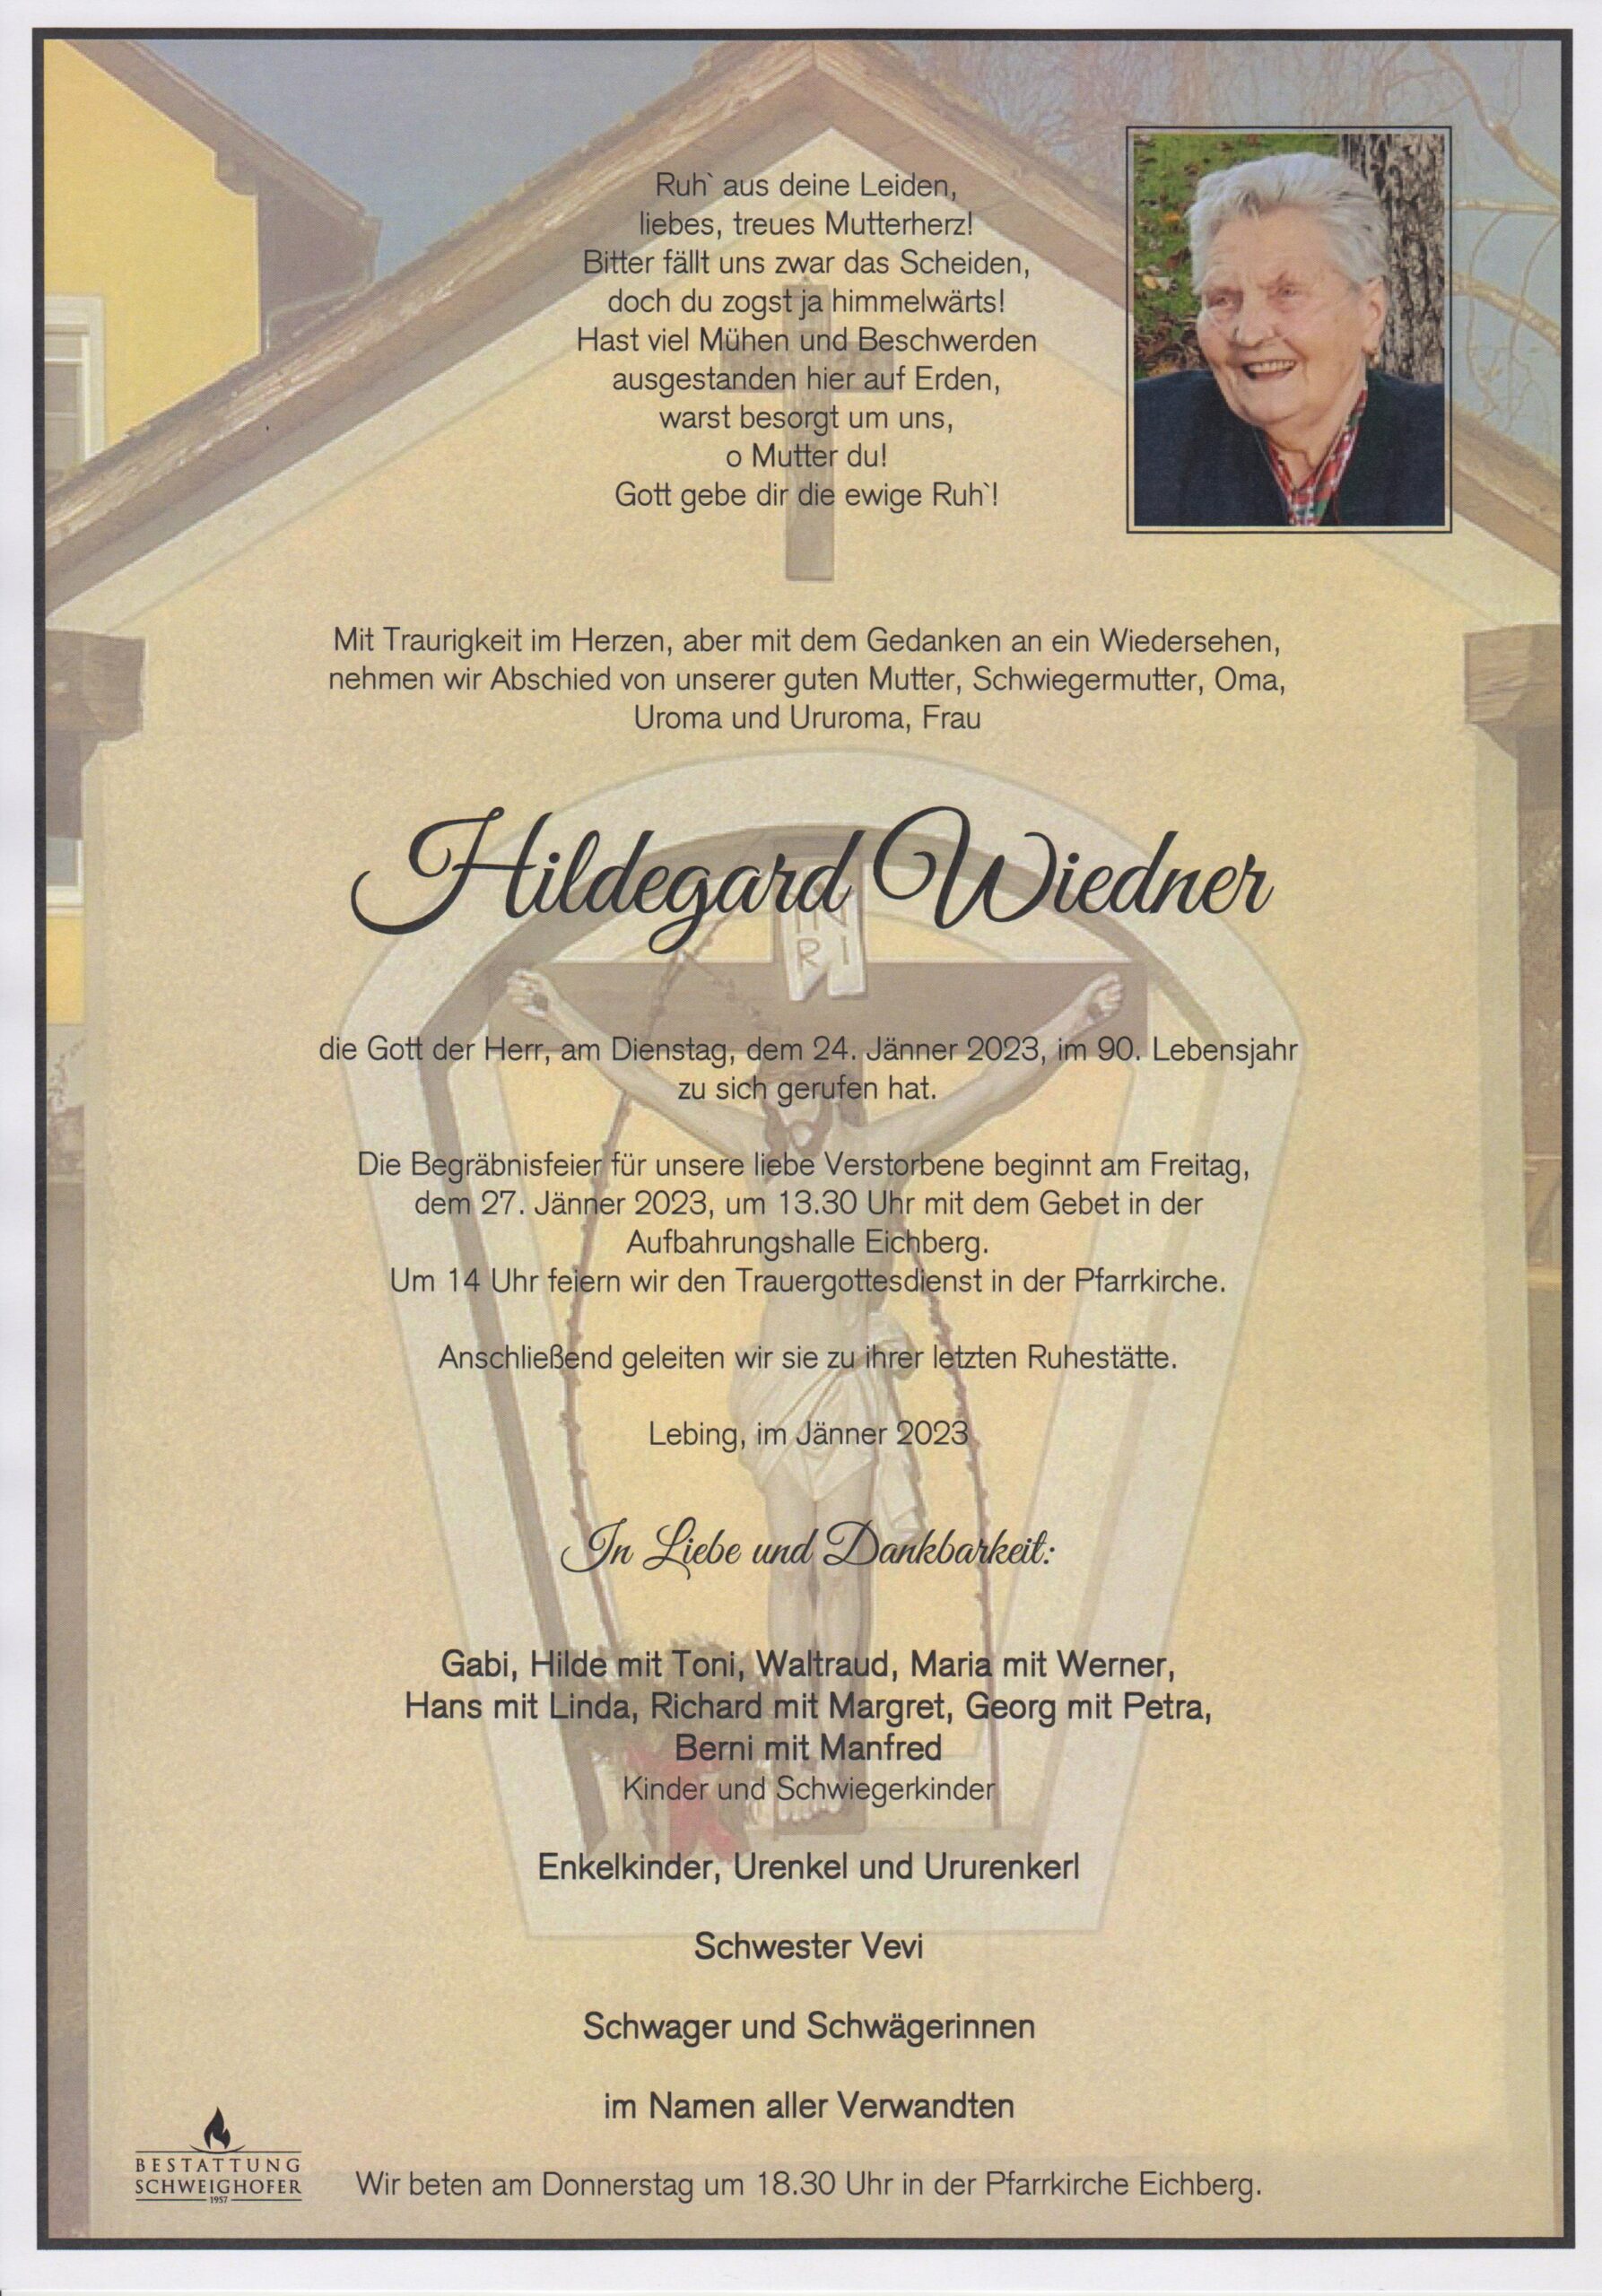 You are currently viewing Hildegard Wiedner